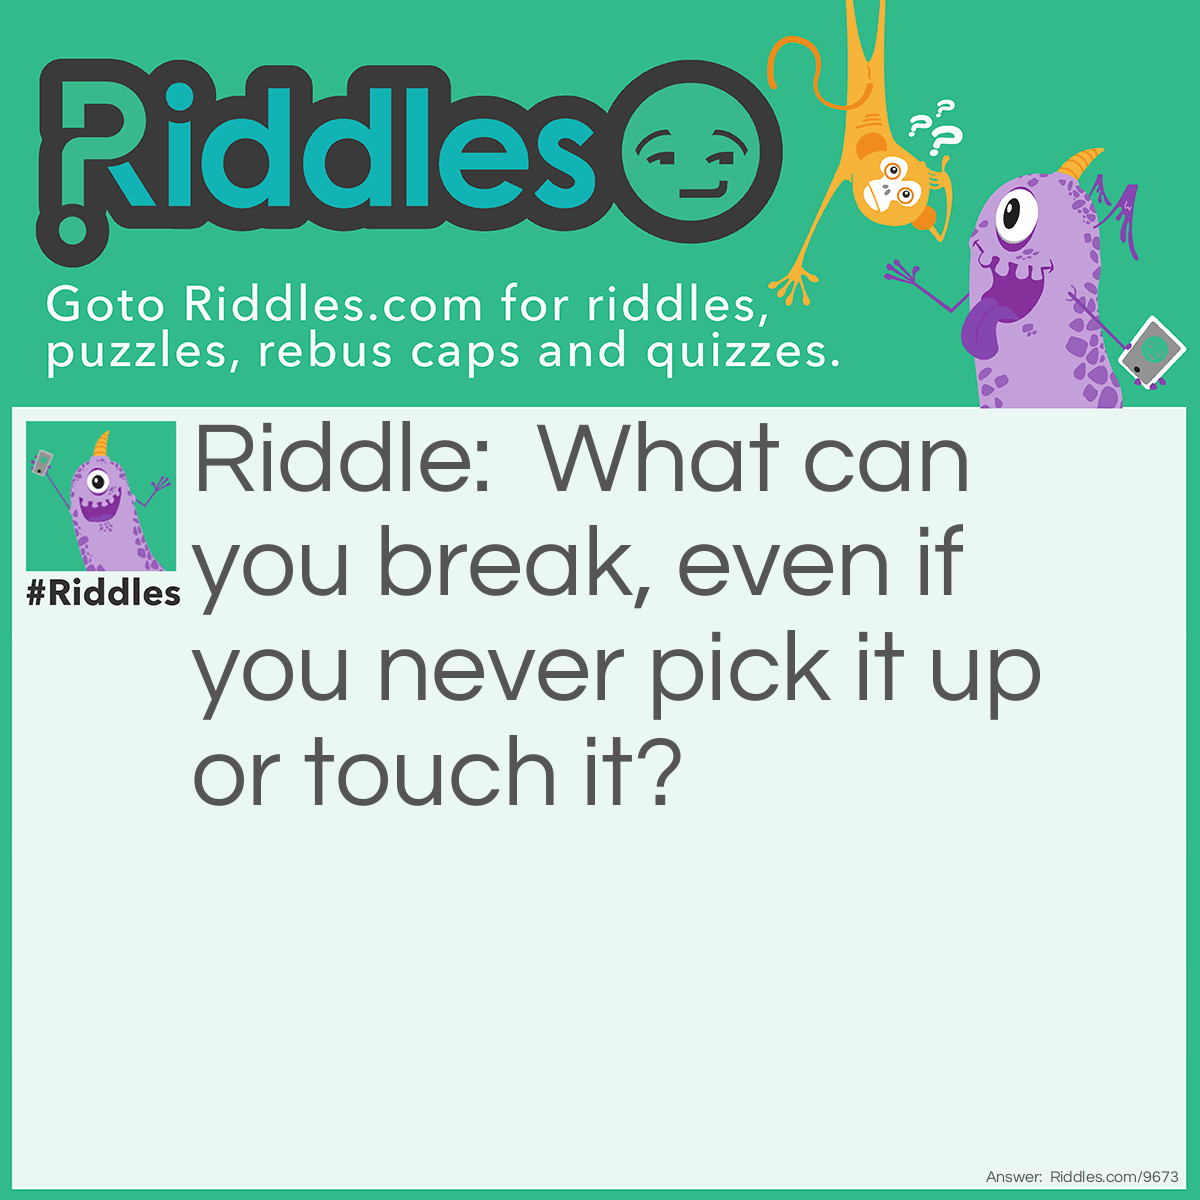 Riddle: What can you break, even if you never pick it up or touch it? Answer: A Promise